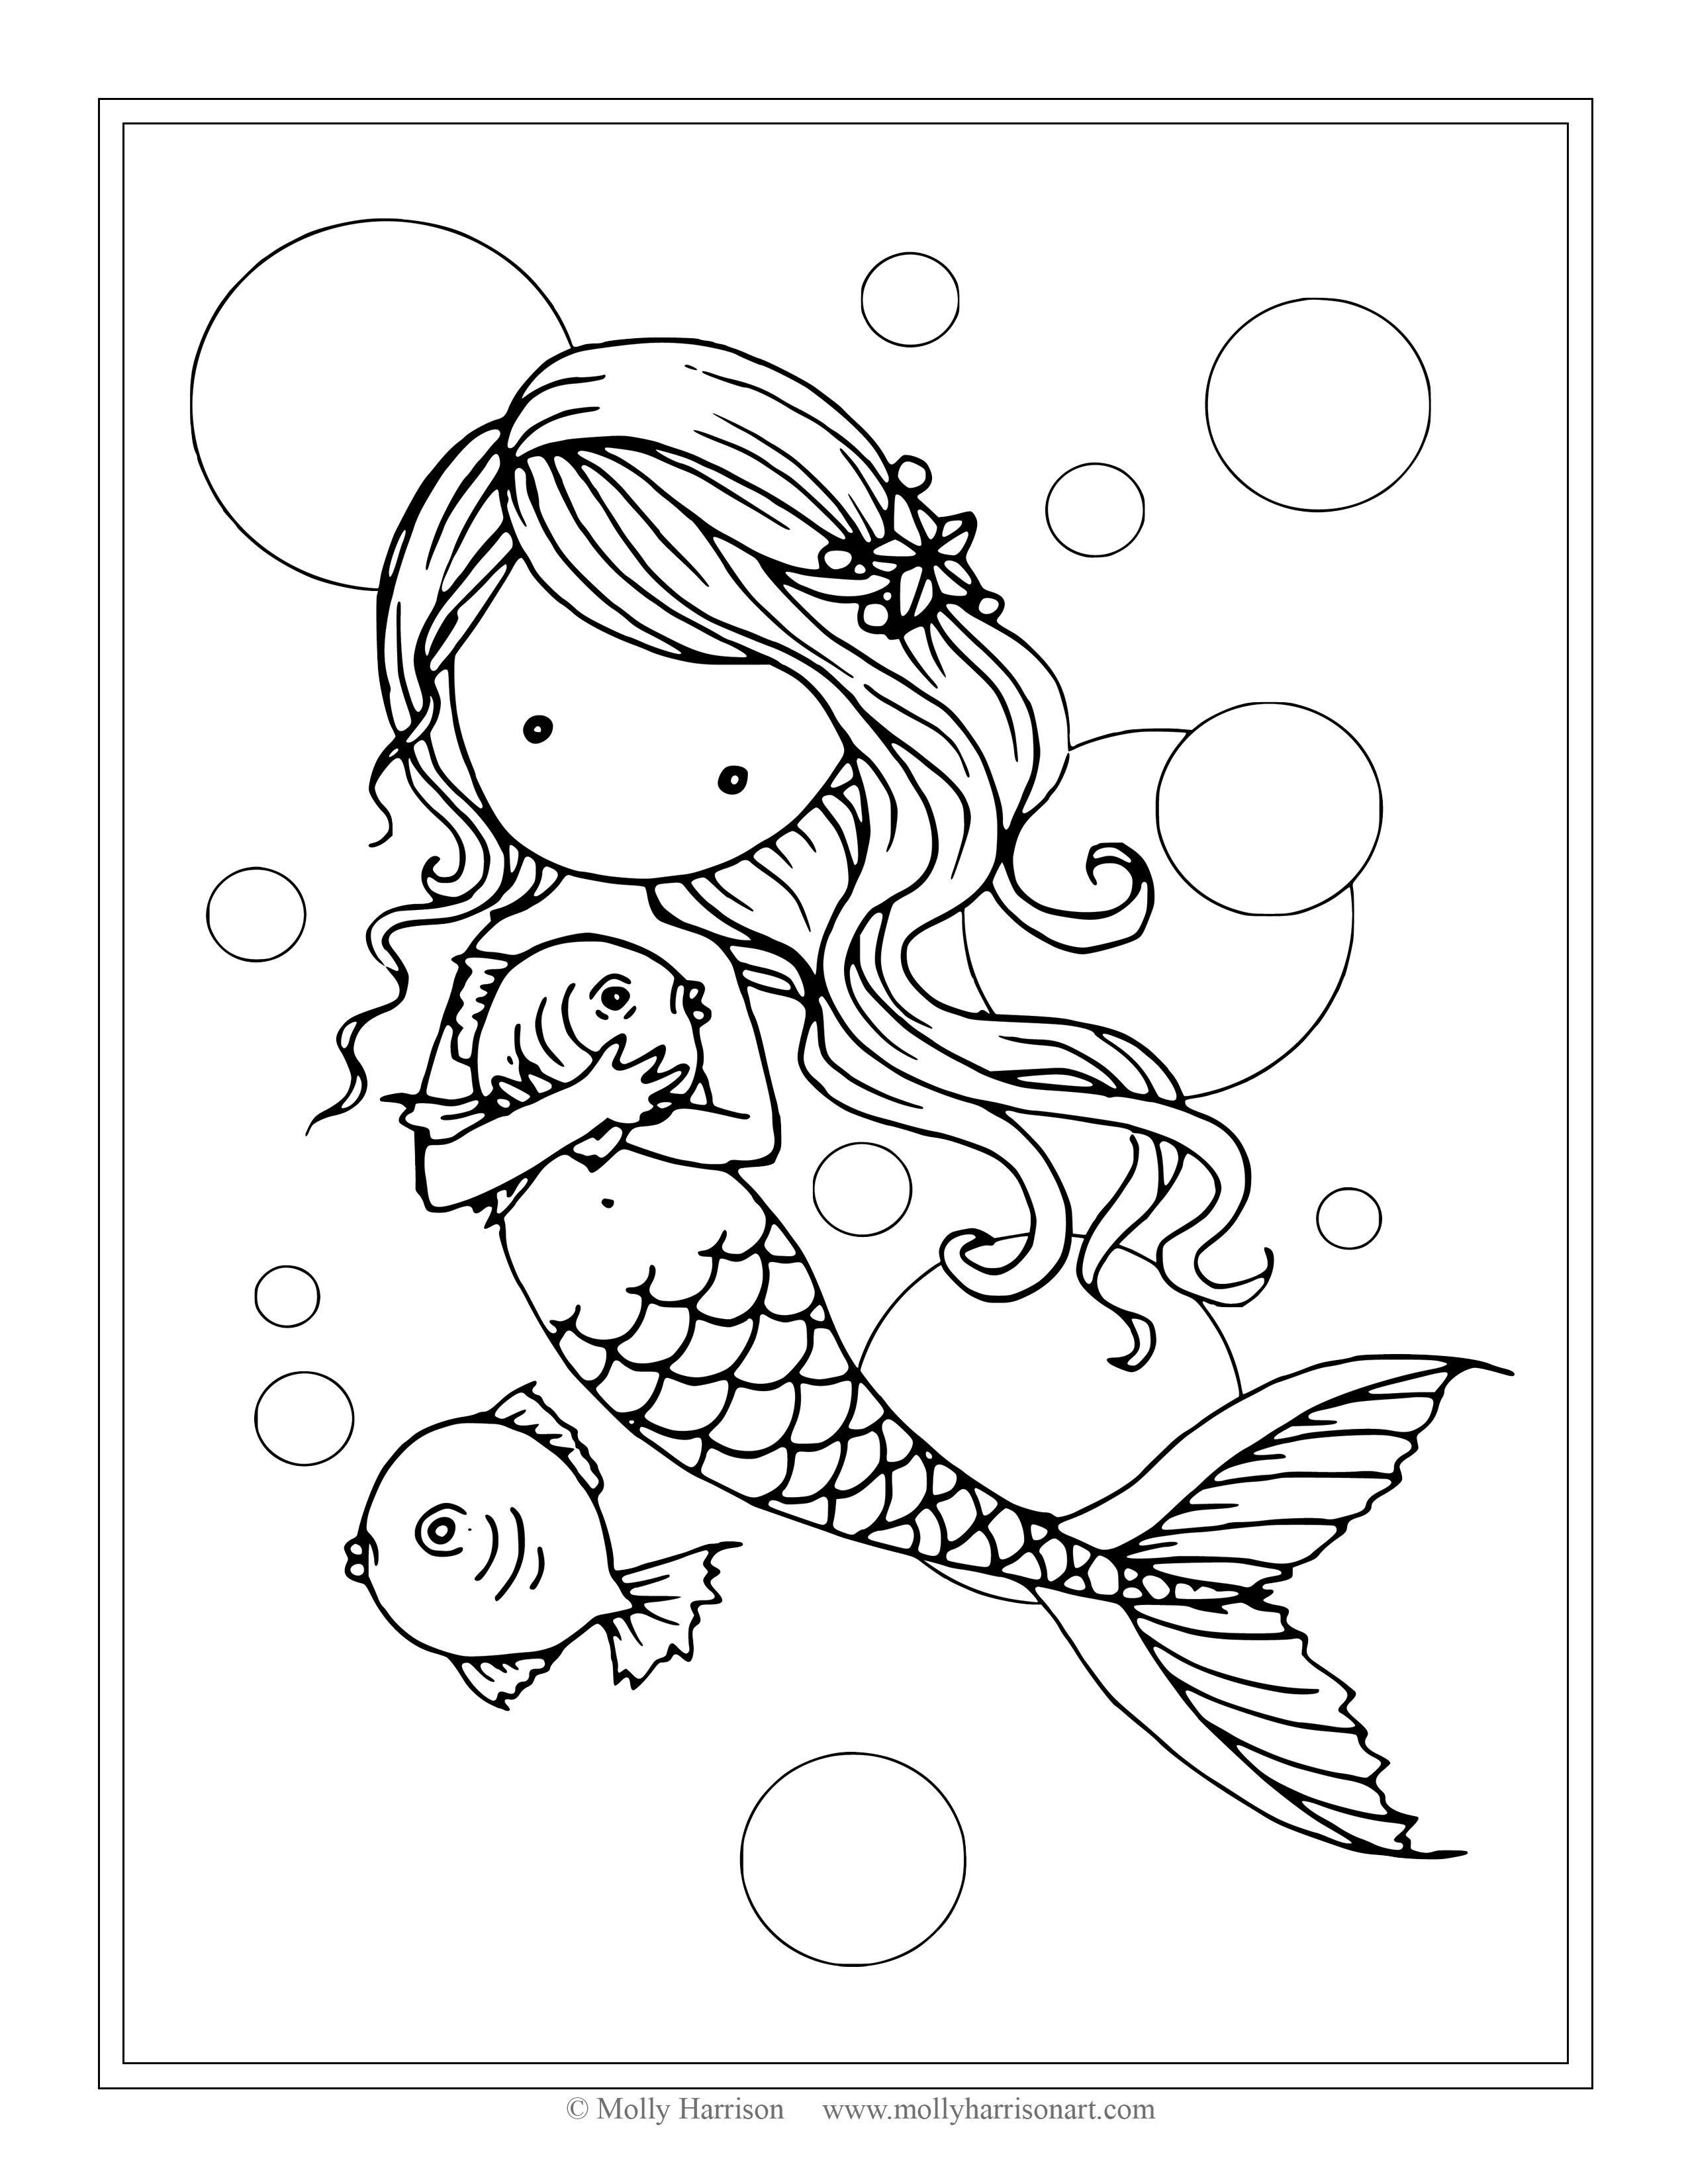 Coloring Pages For Toddlers Mermaid
 Free Mermaid with Fish Coloring Page by Molly Harrison